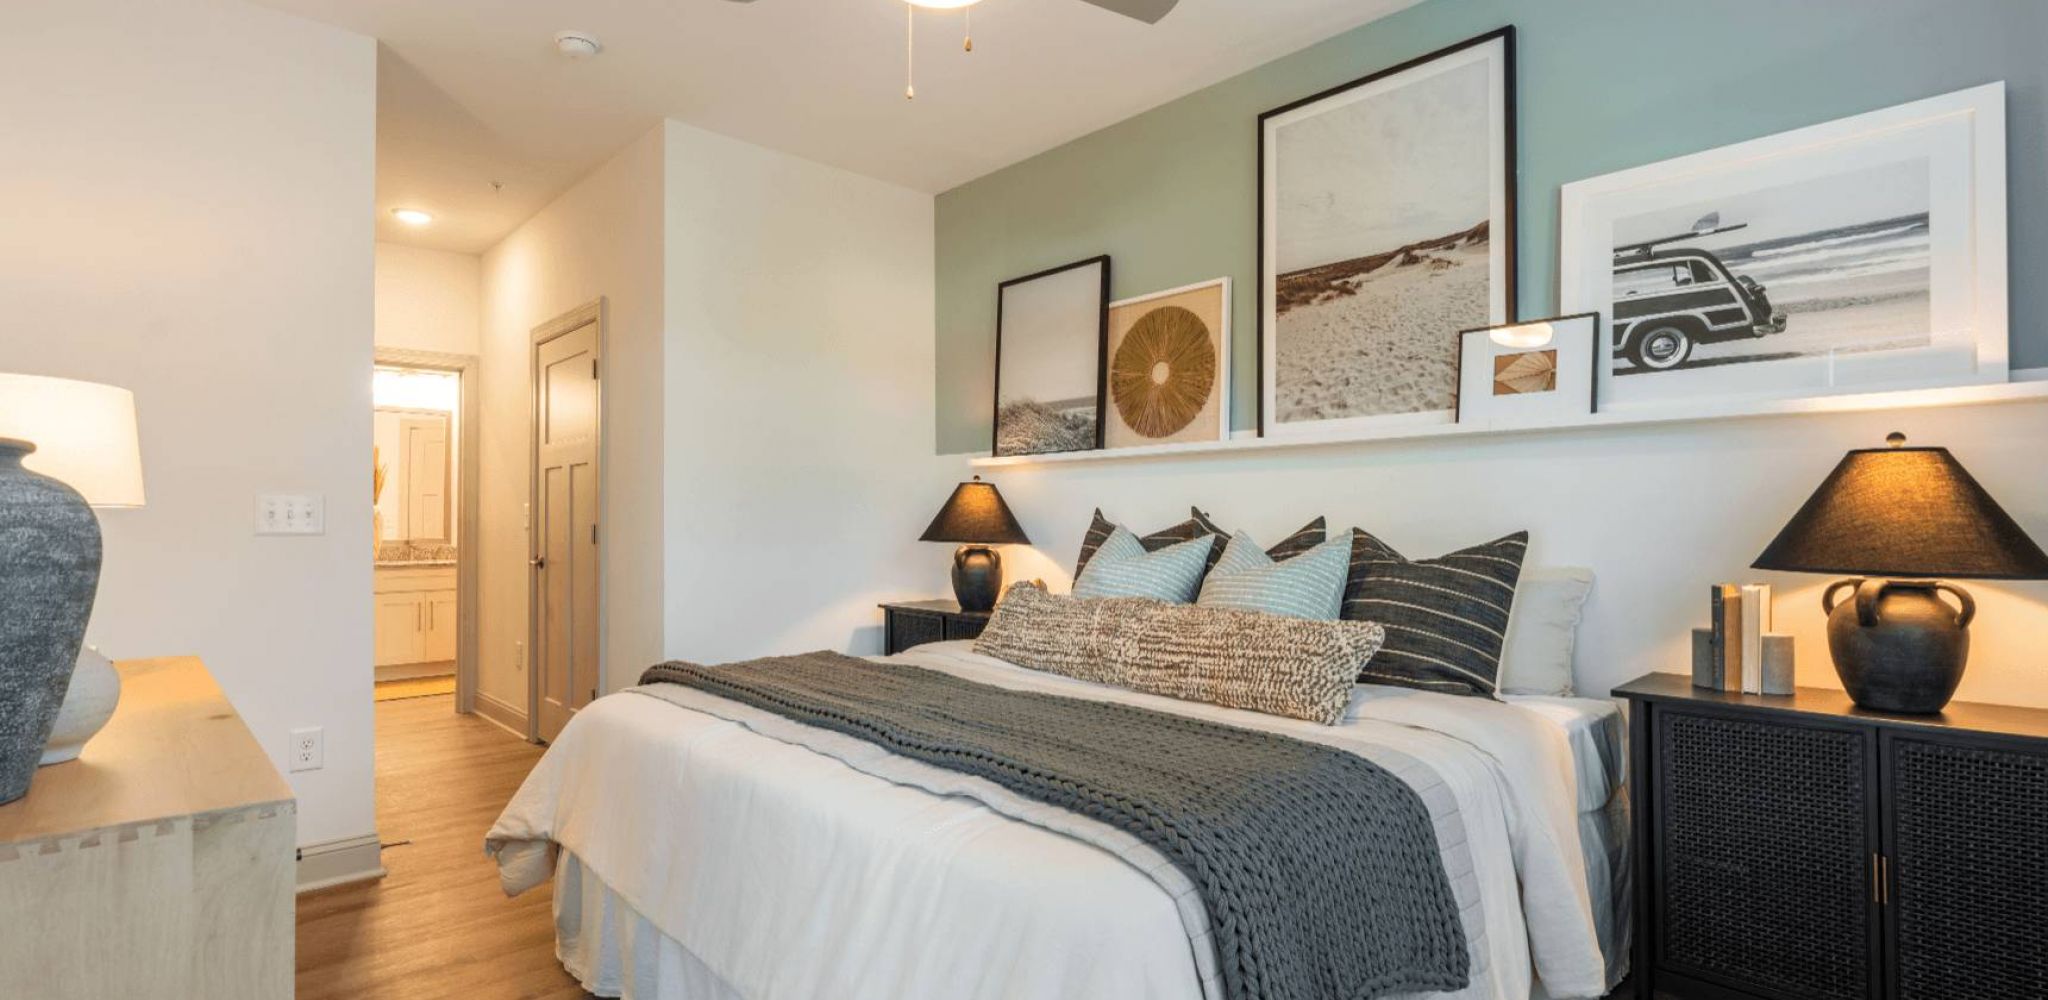 Hawthorne Waterway apartment bedroom with wood flooring, bedside tables, and bed